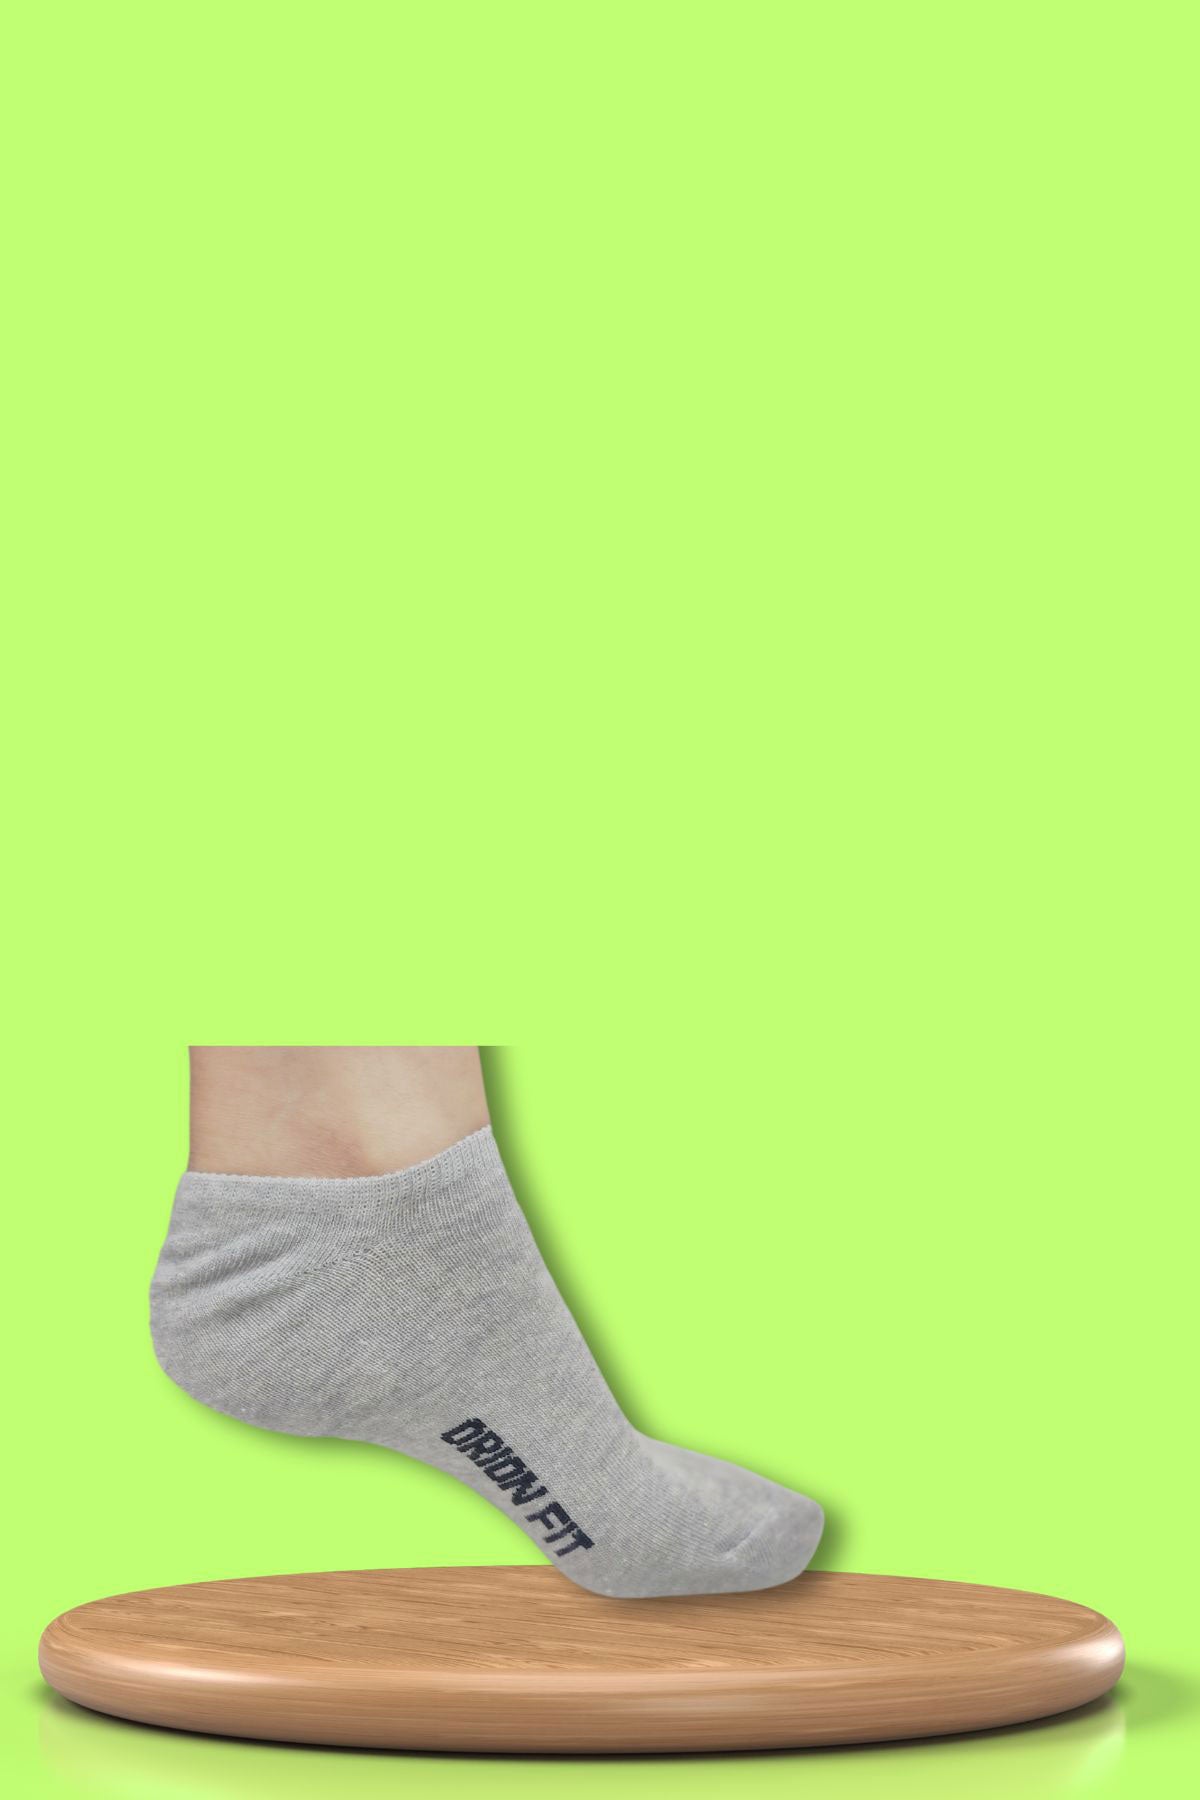 AMPLIFY COTTON COMFORT SOCKS-GREY - The Orion Fit